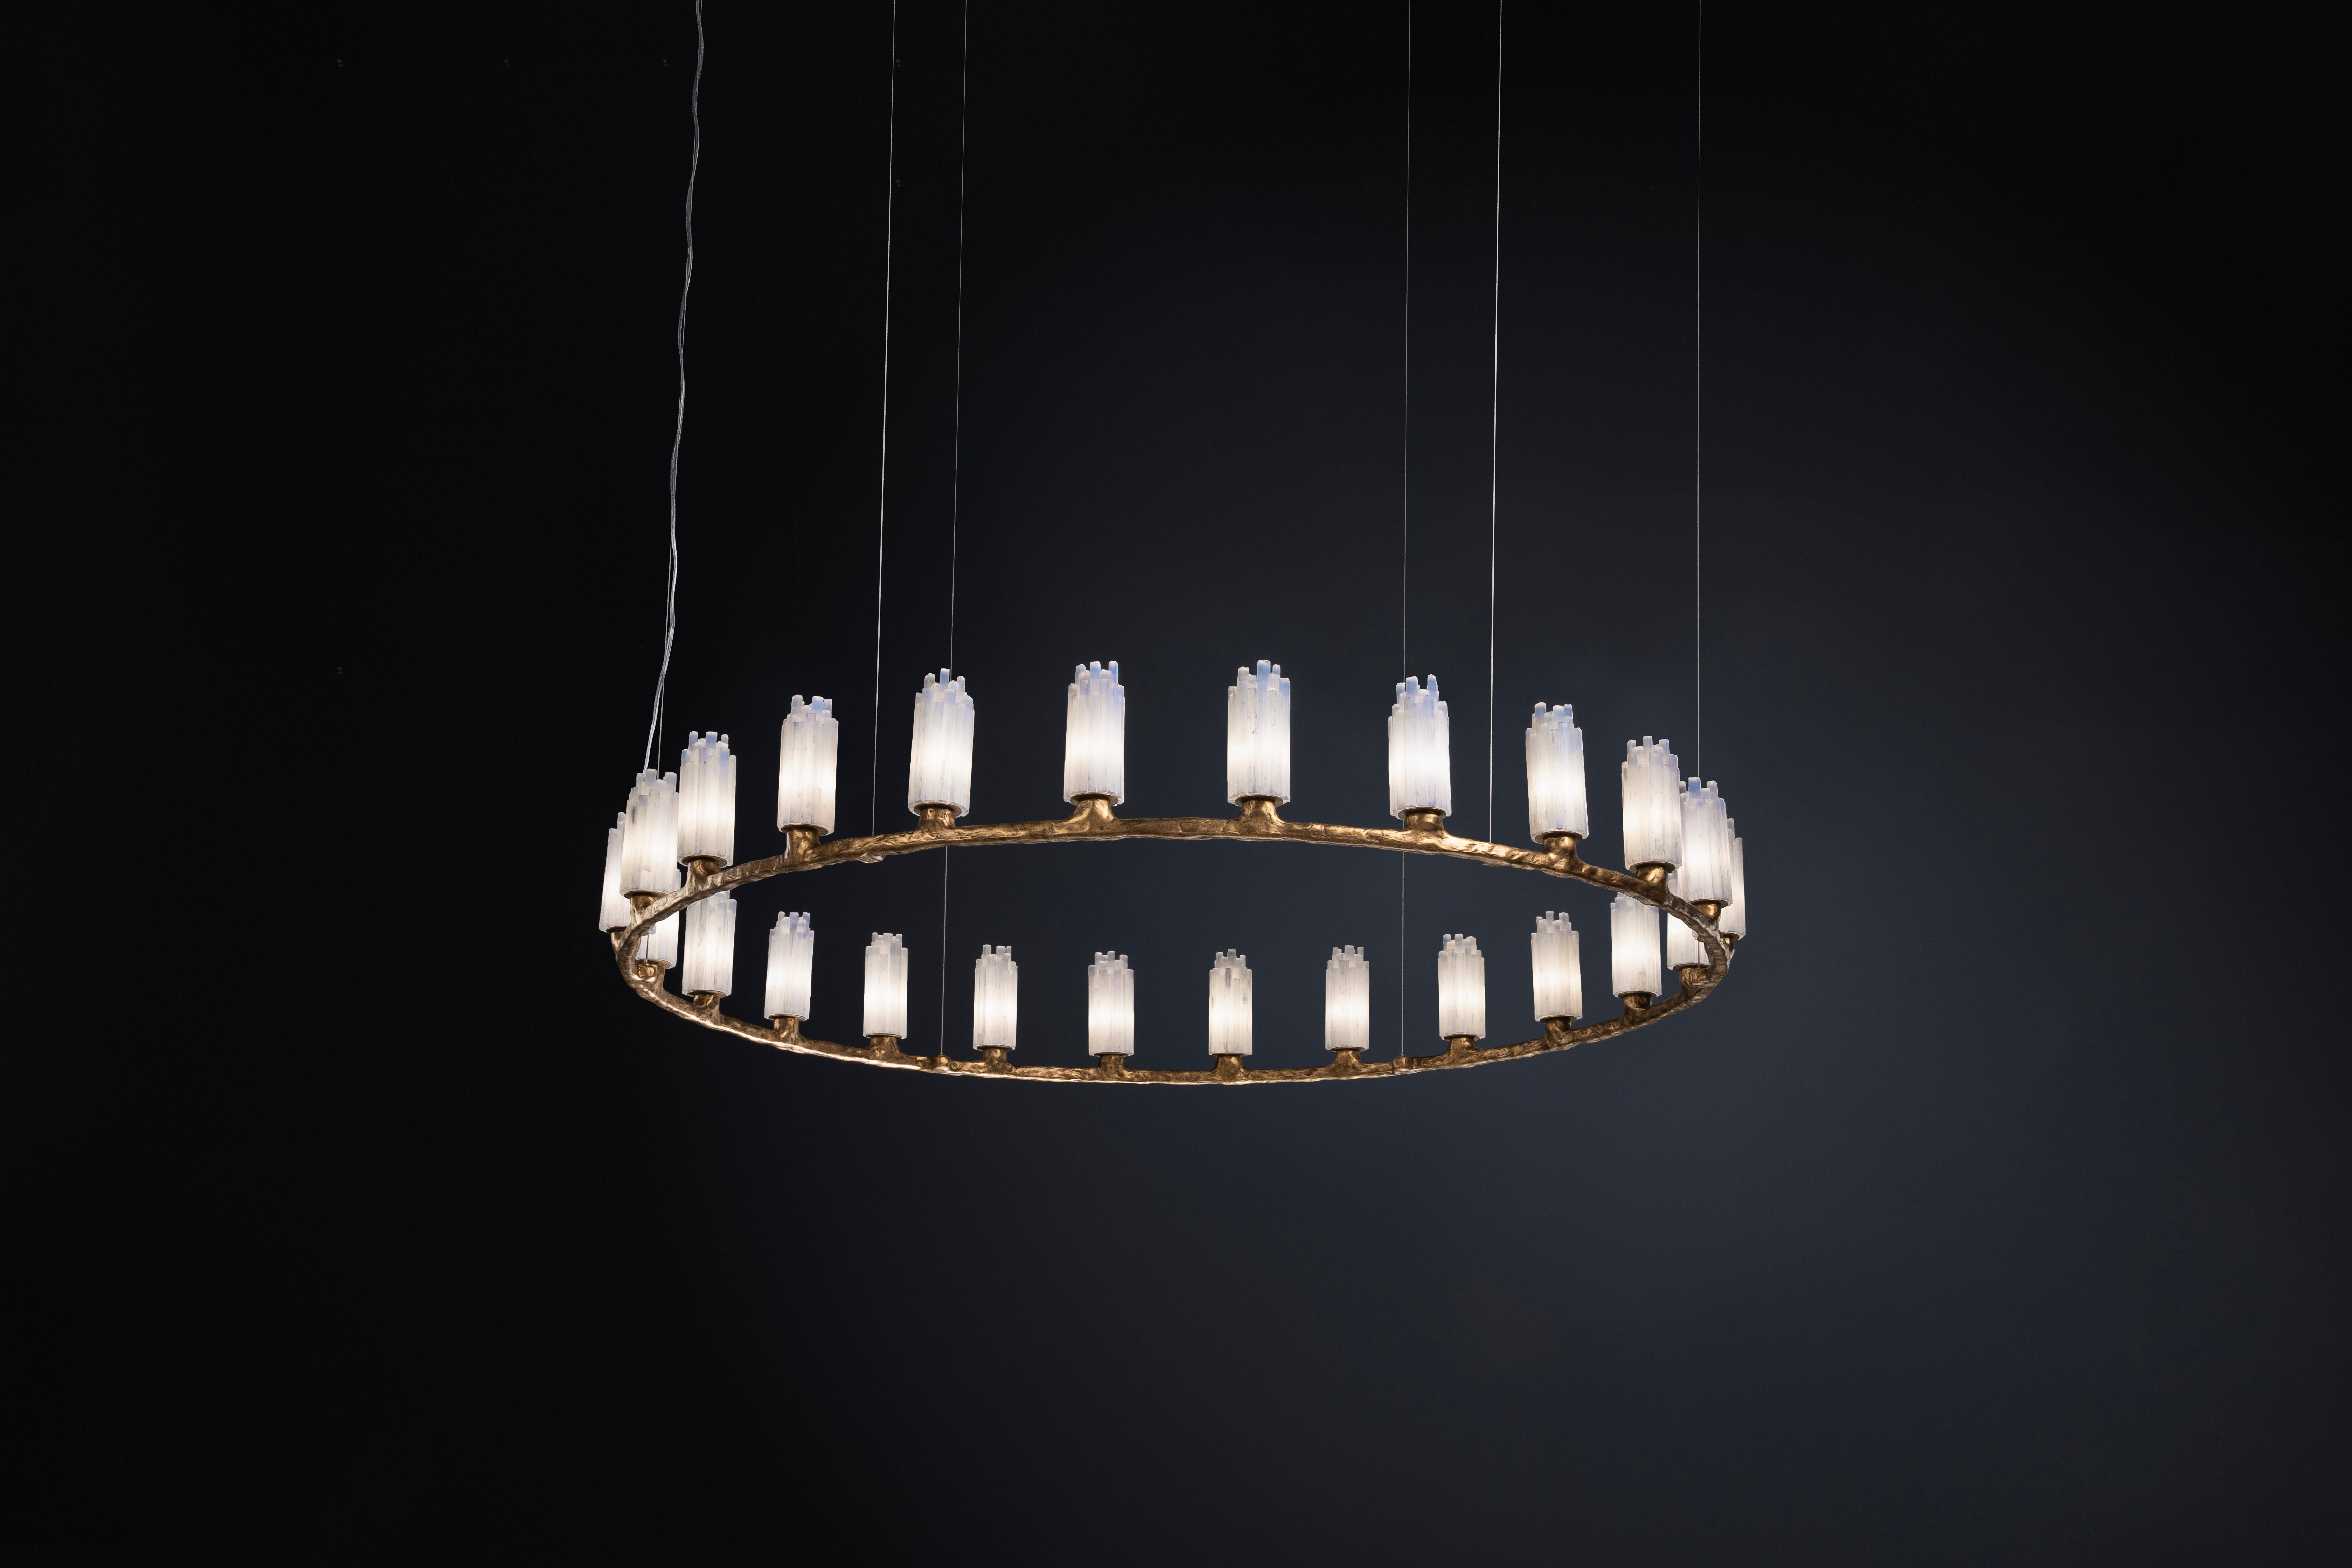 Selenite Pendant Lamp V by Aver
Dimensions: Ø 123 x H 16.5 cm.
Materials: Metal, selenite.

Different finishes available: Rustic Bronze, Vintage Gold, Aged Copper Veneer, Onyx Veneer, Gold Veneer, Bronze Gold Veneer, Aged Gold Veneer, Smoked Gold